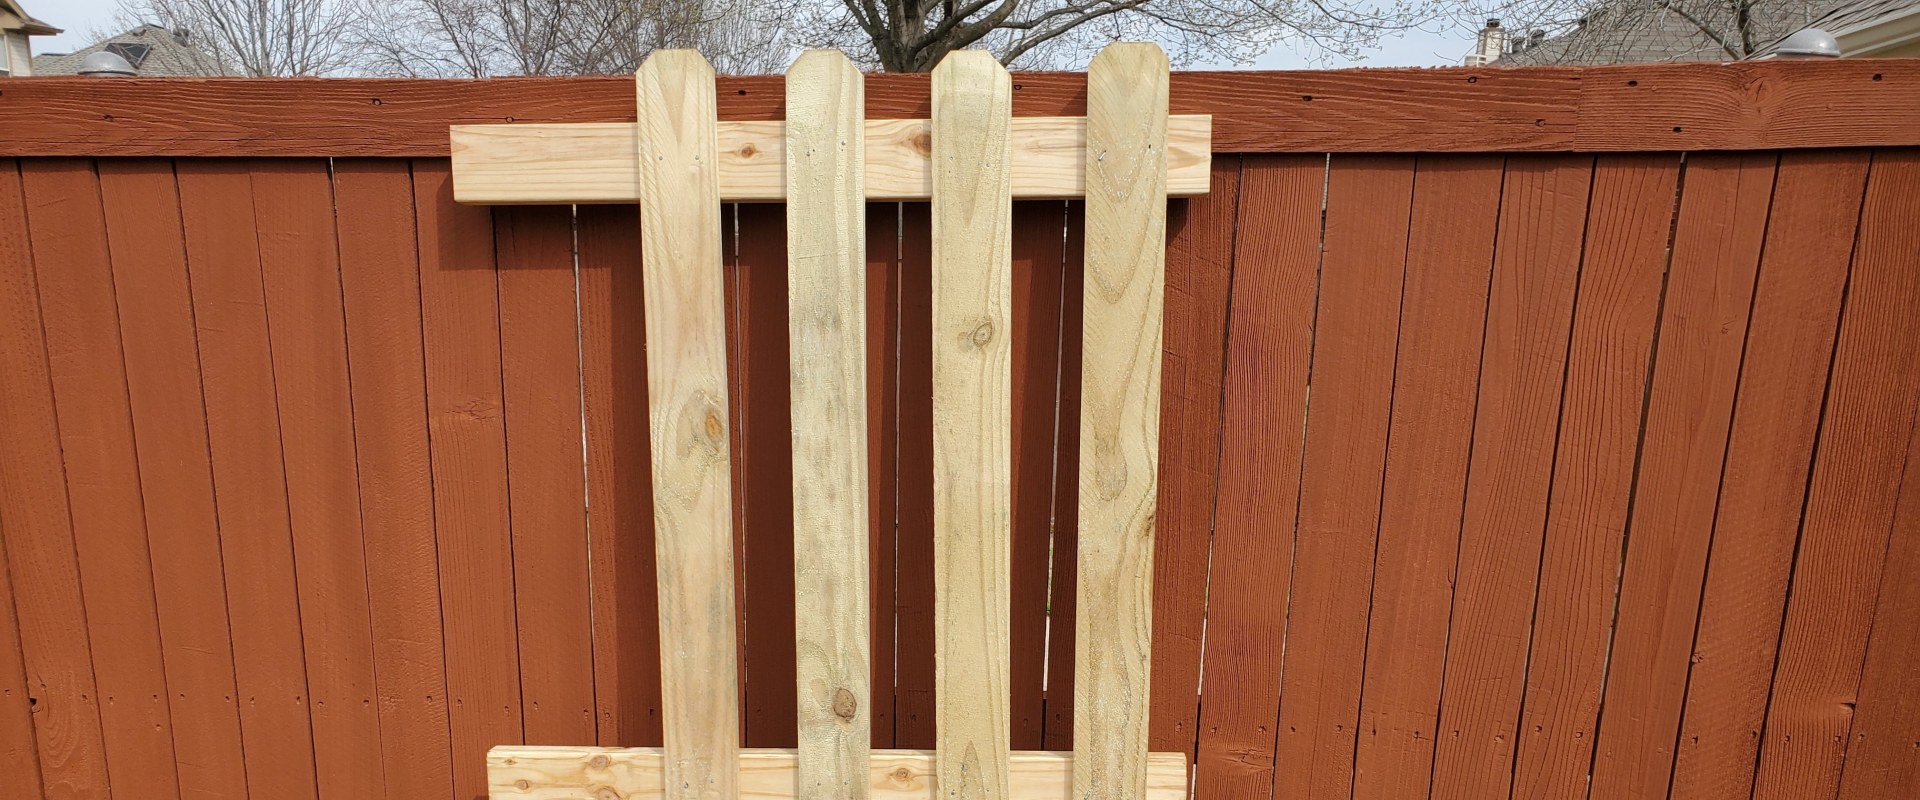 How to Replace Damaged Pickets in a Wood Fence